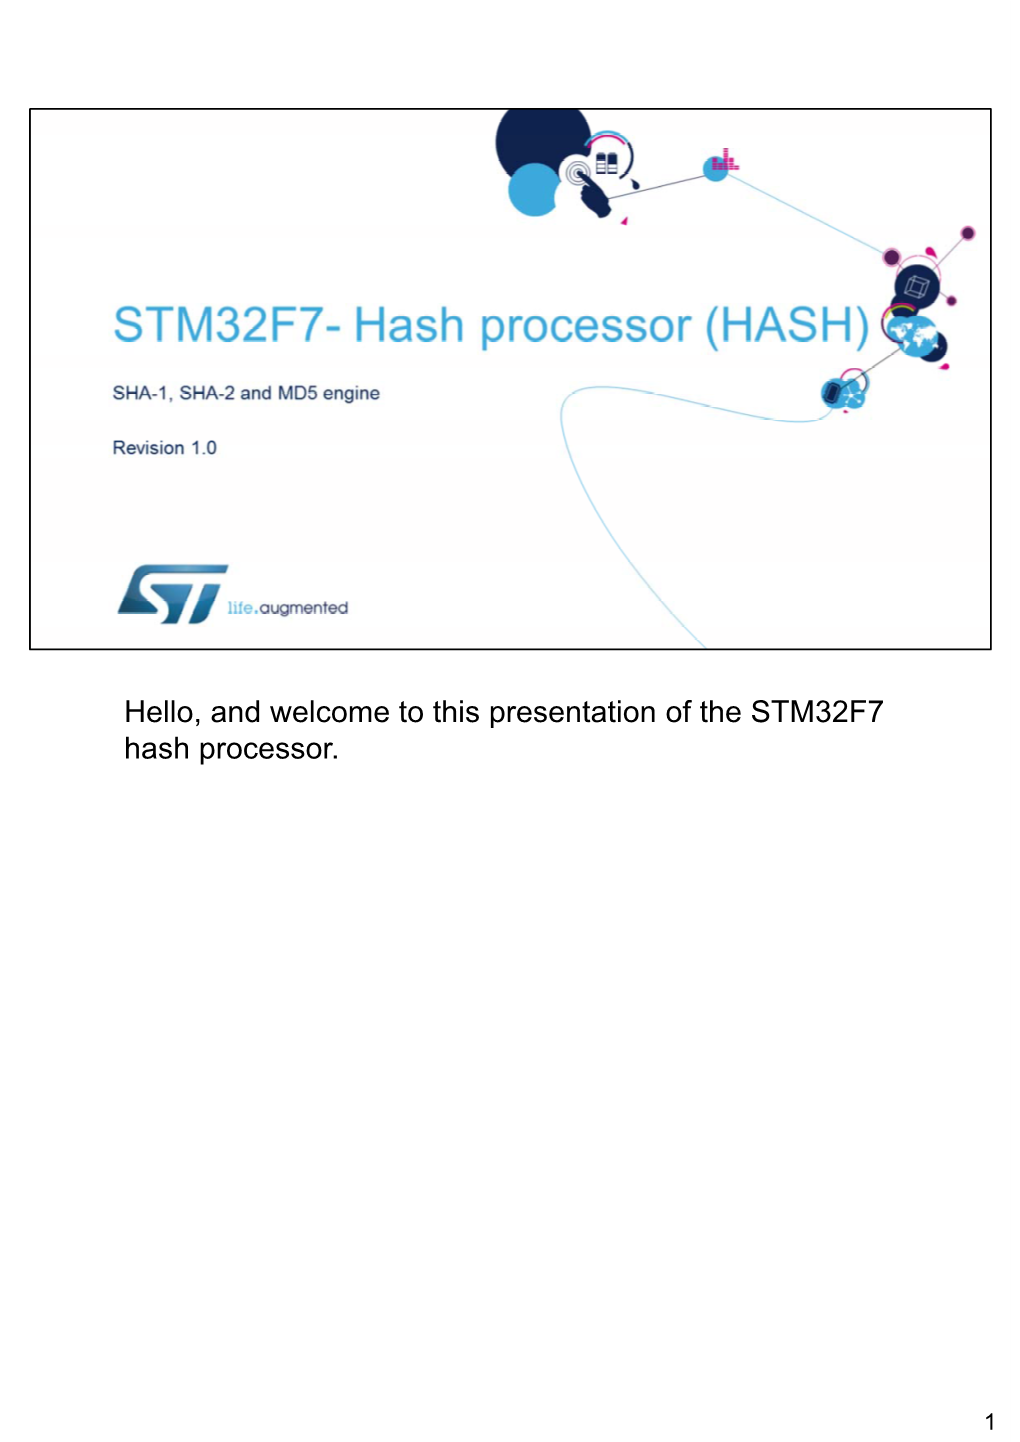 Hello, and Welcome to This Presentation of the STM32F7 Hash Processor